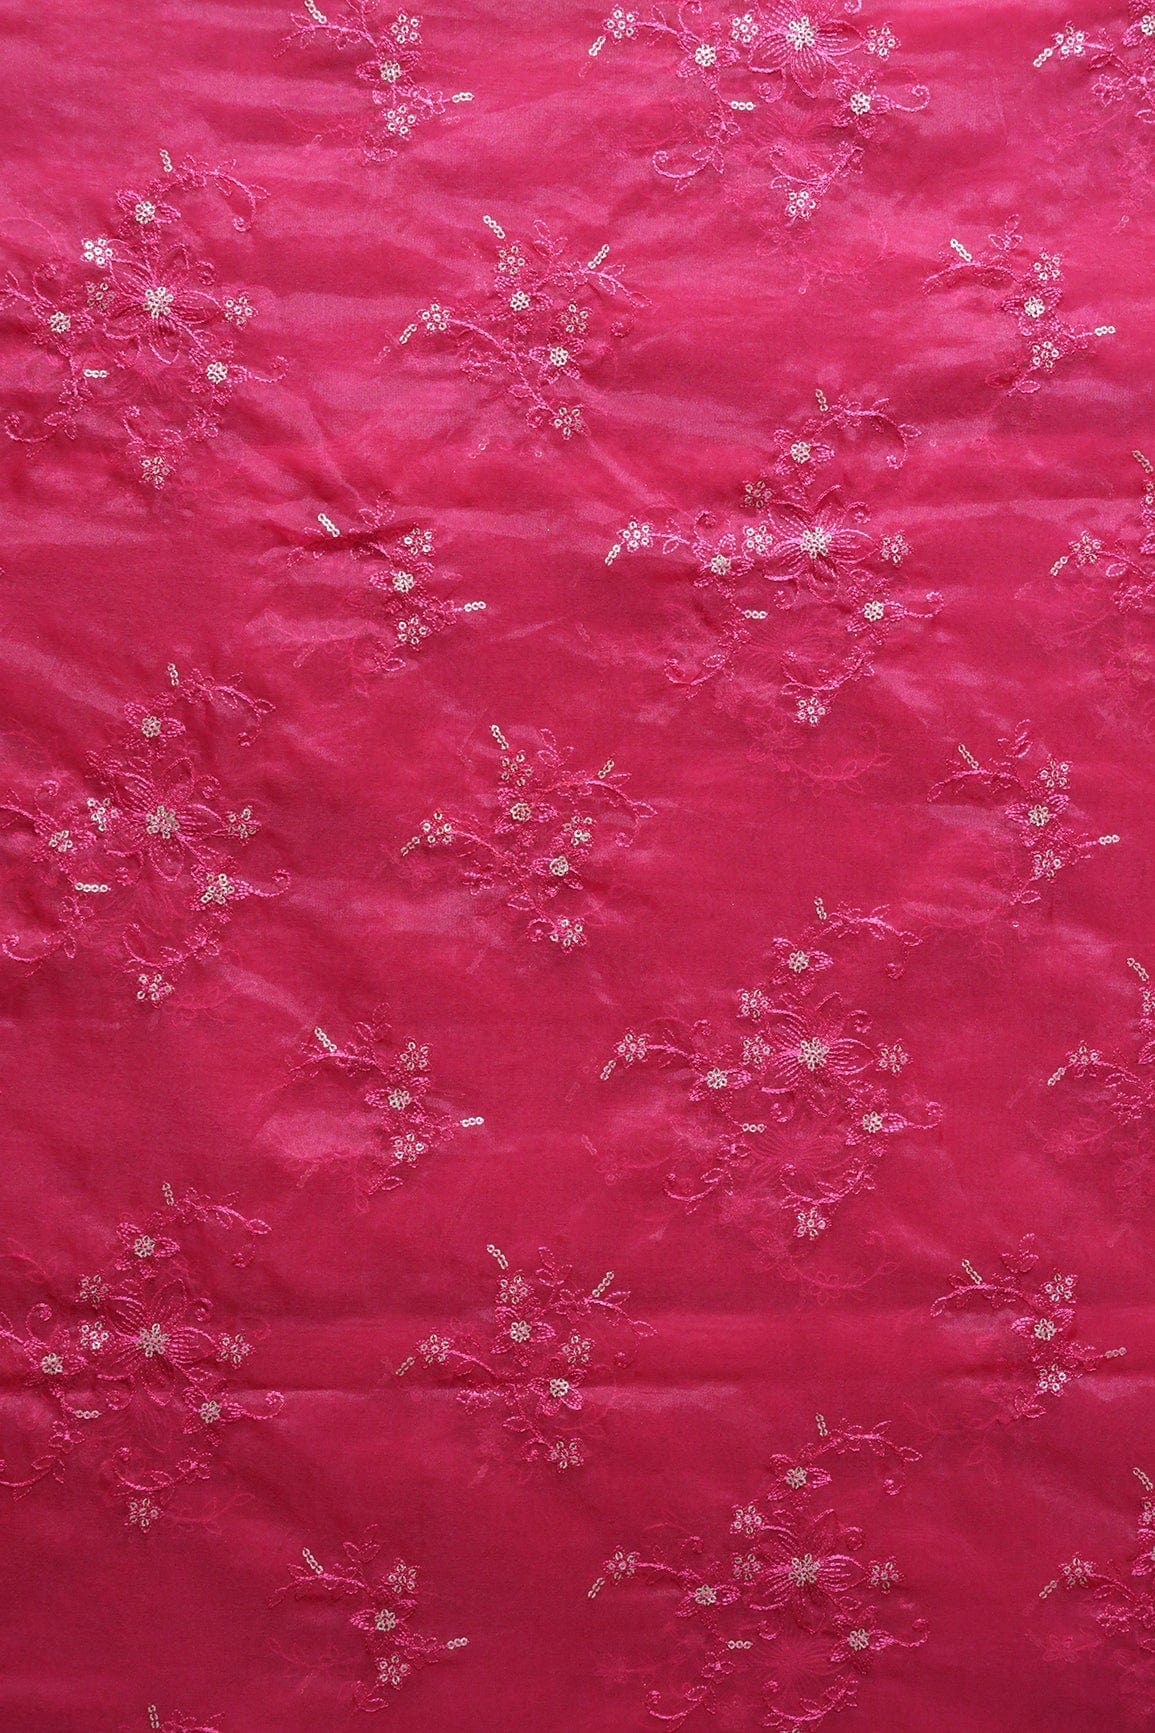 doeraa Embroidery Fabrics Dark Pink Thread With Gold Sequins Embroidery Work On Fuchsia Organza Fabric